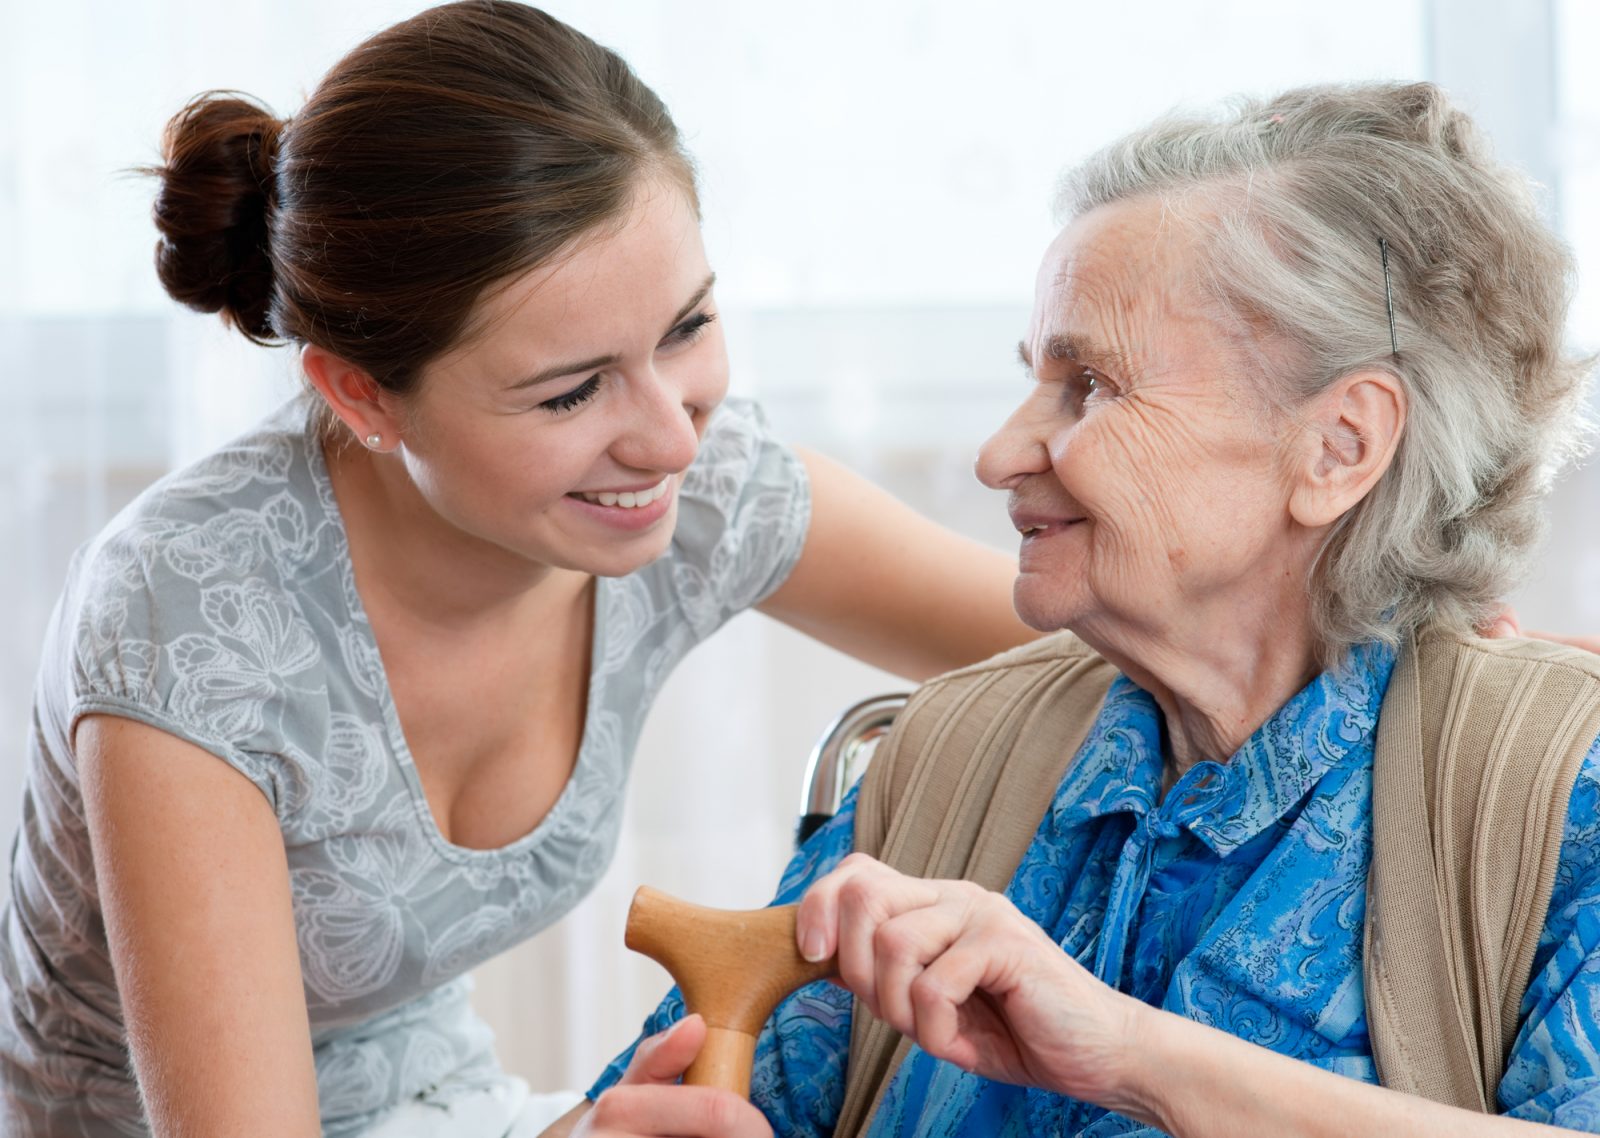 The role of a home health aide